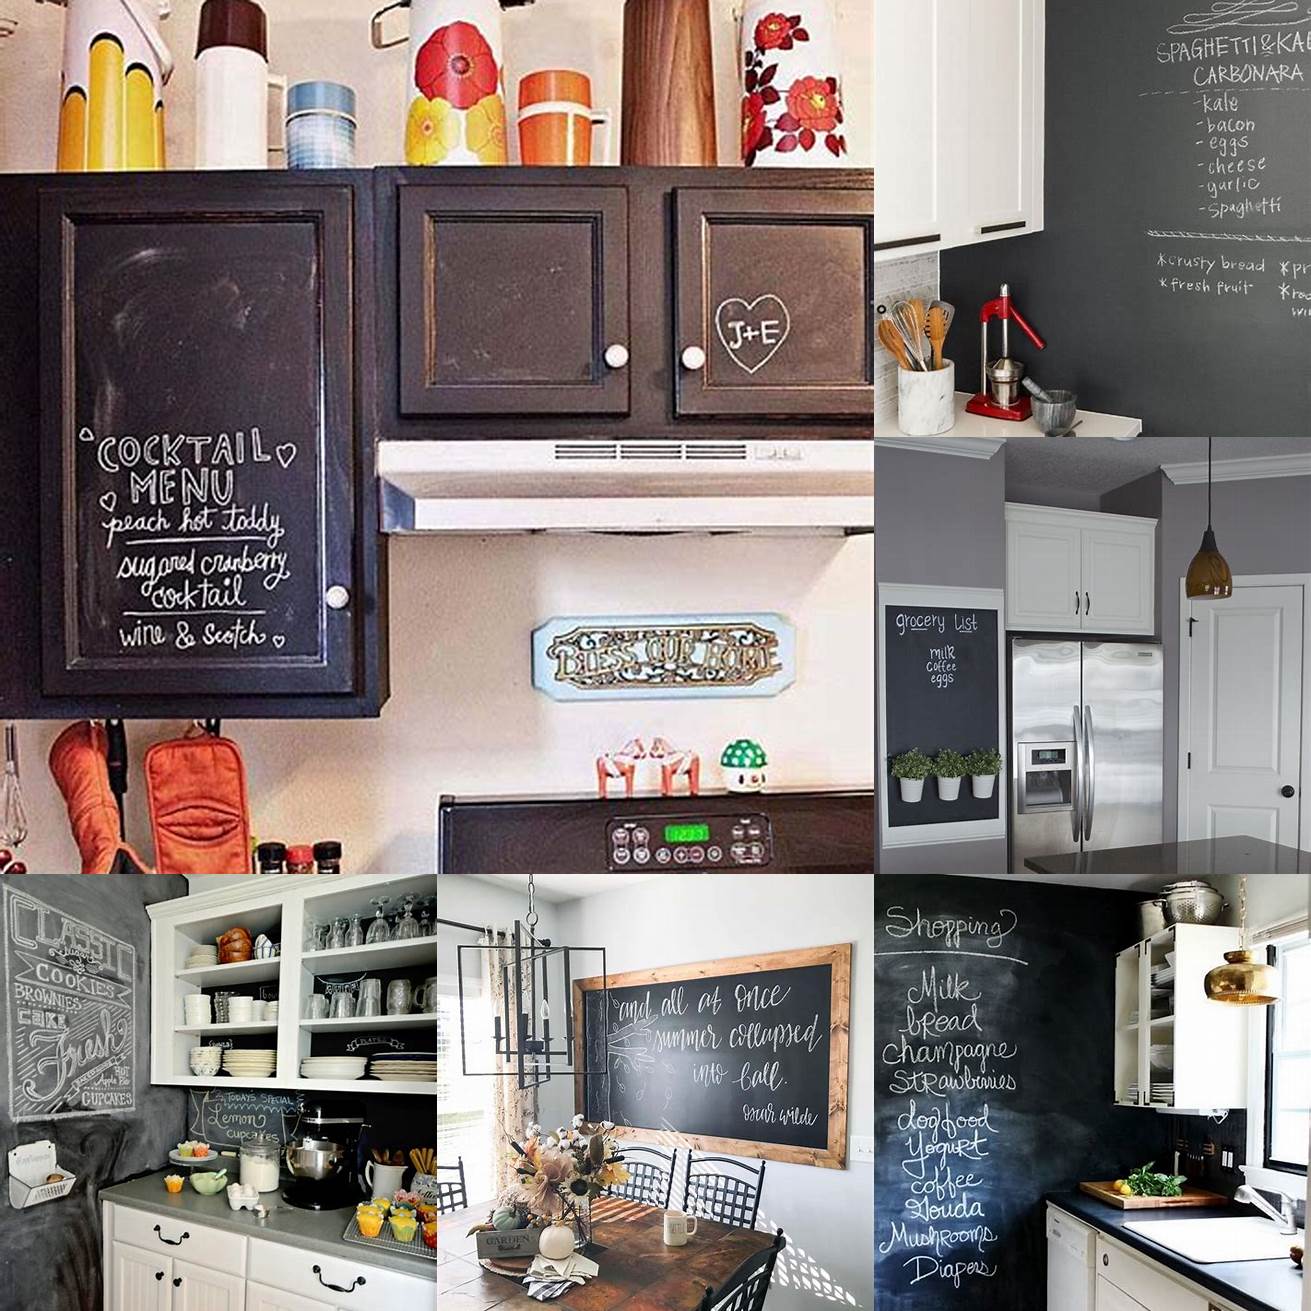 Chalkboard paint can be used to create a DIY version of a kitchen chalkboard on any surface This allows for more customization in terms of size and design